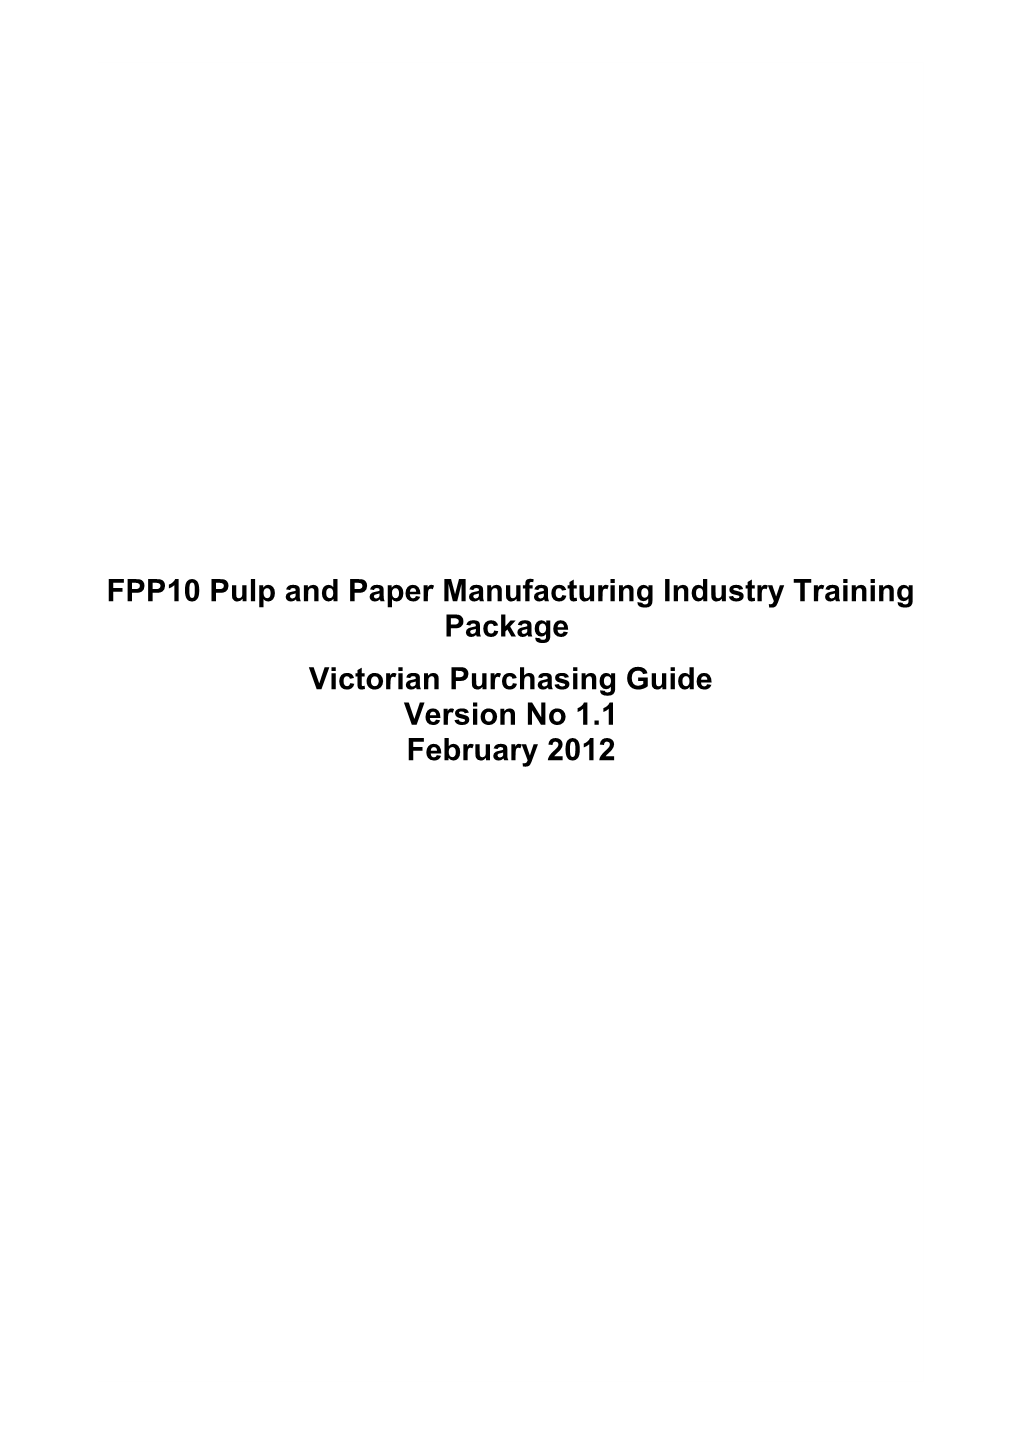 Victorian Purchasing Guide for FPP10 Pulp and Paper Manufacturing Industry Version 1.1